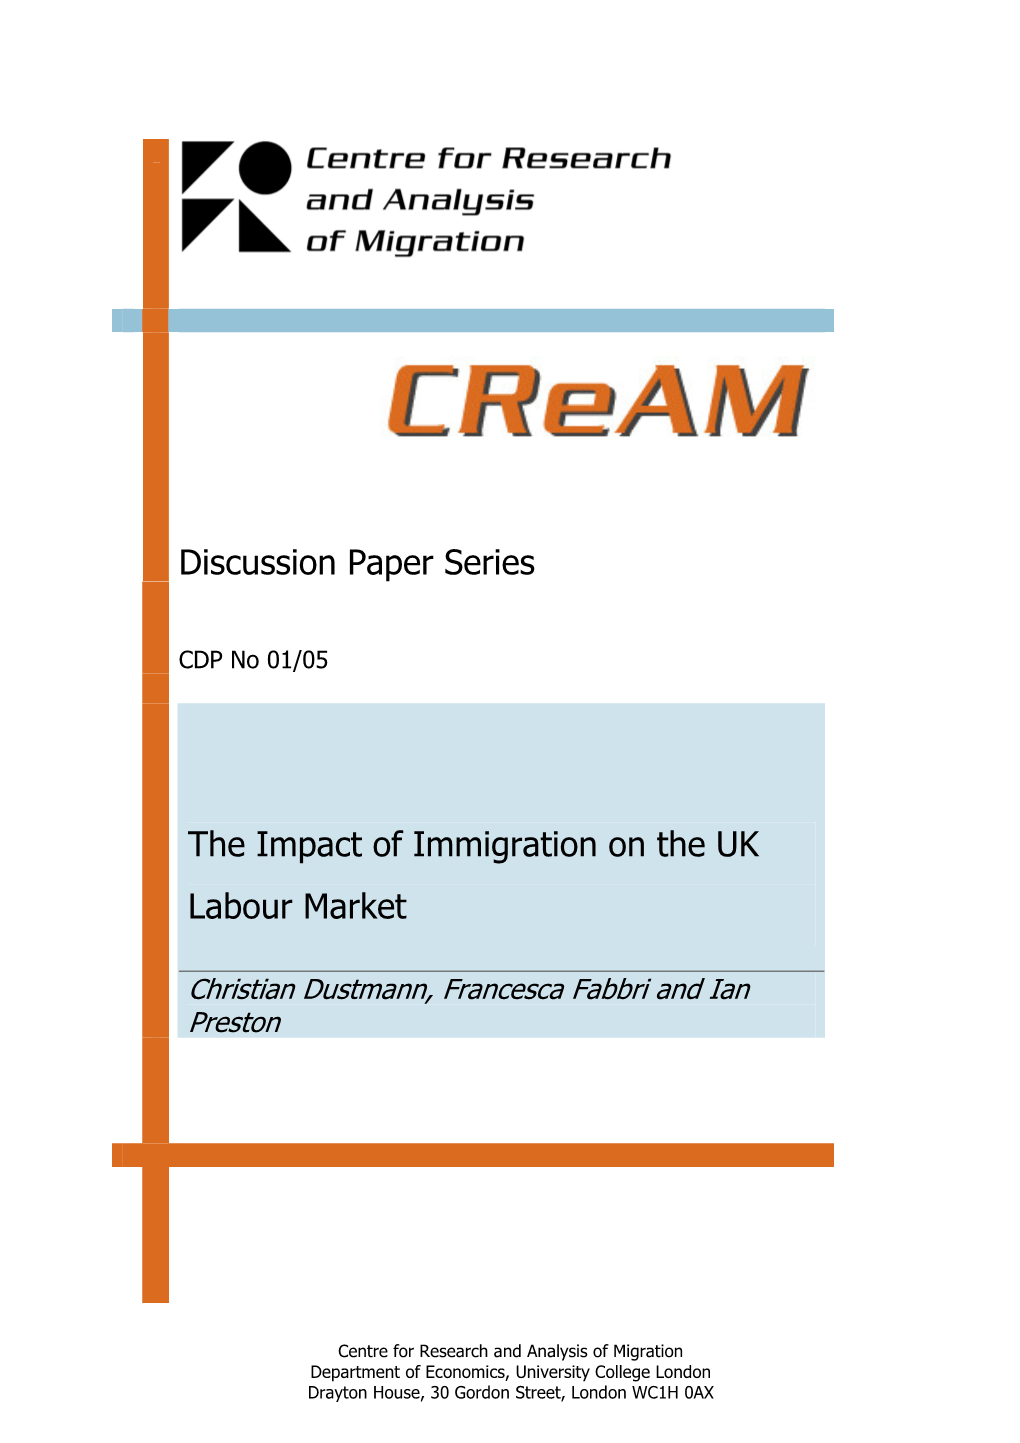 The Impact of Immigration on the UK Labour Market